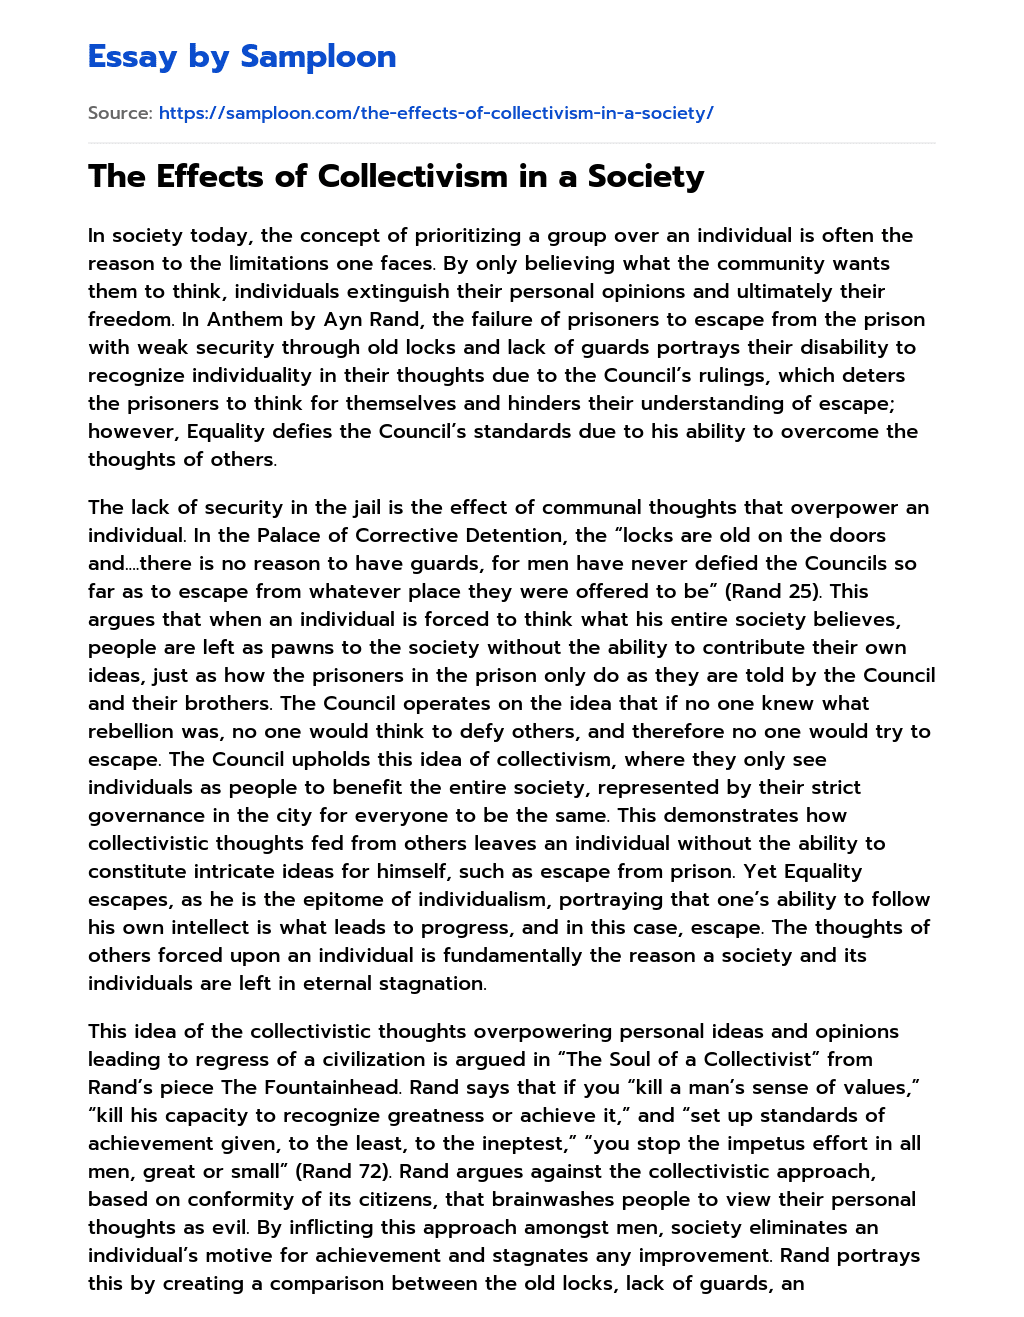 The Effects of Collectivism in a Society  essay